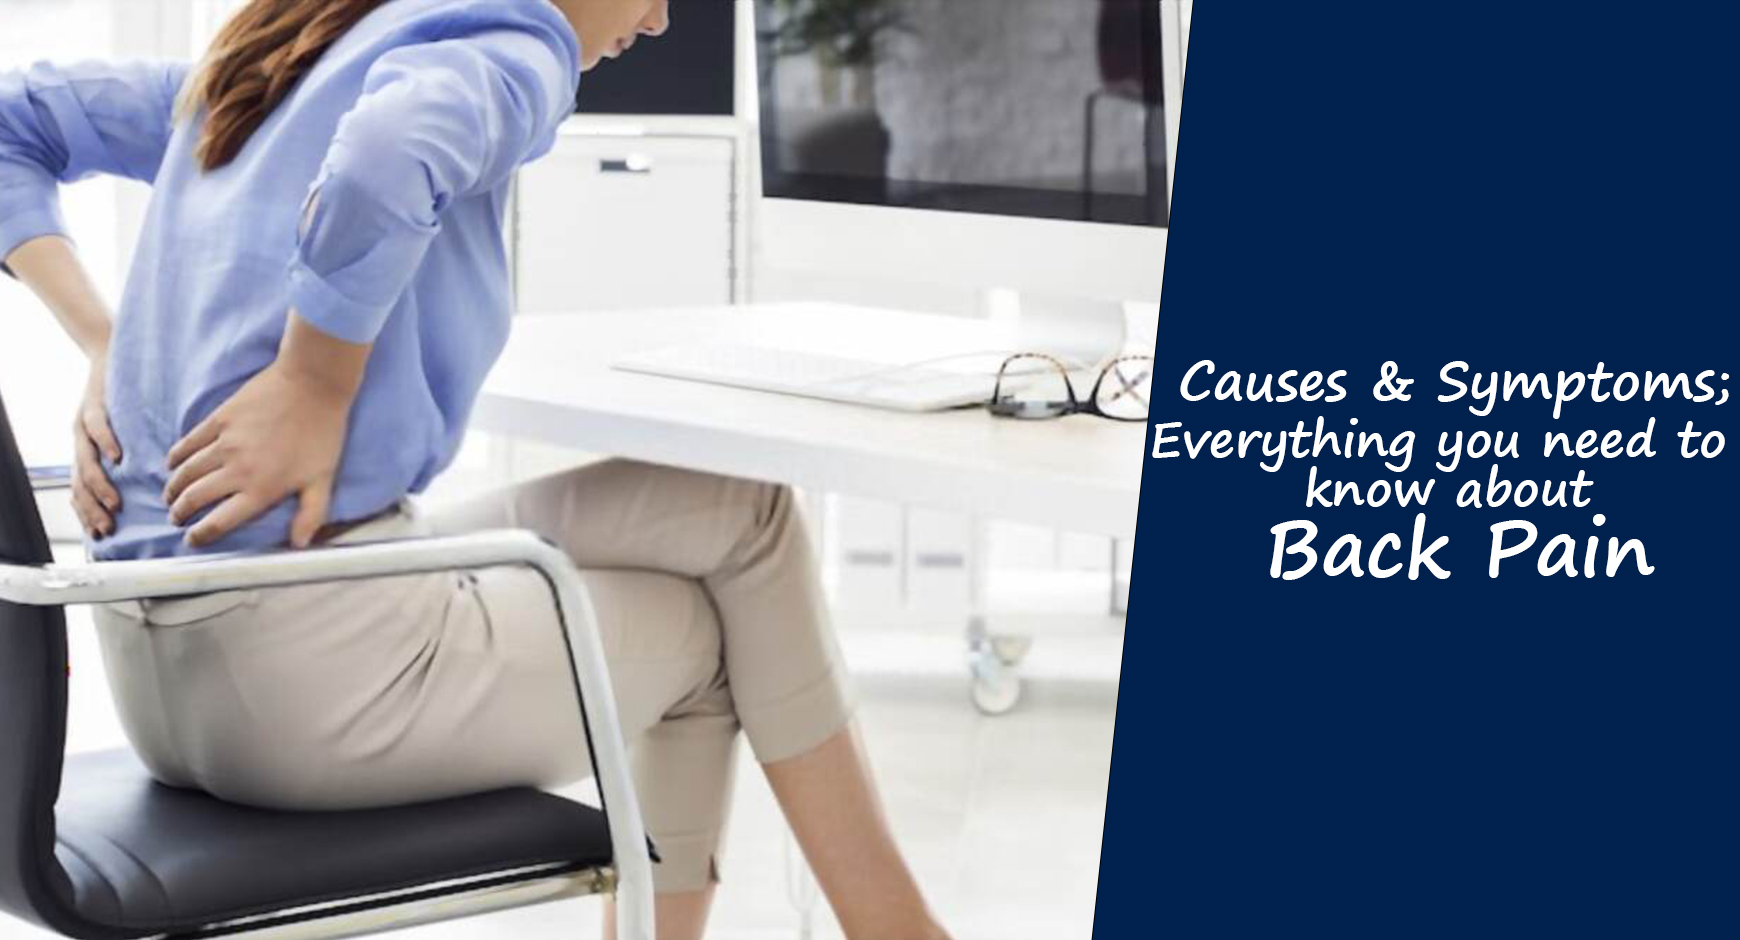 Everything you need to know about back pain; Causes & Symptoms